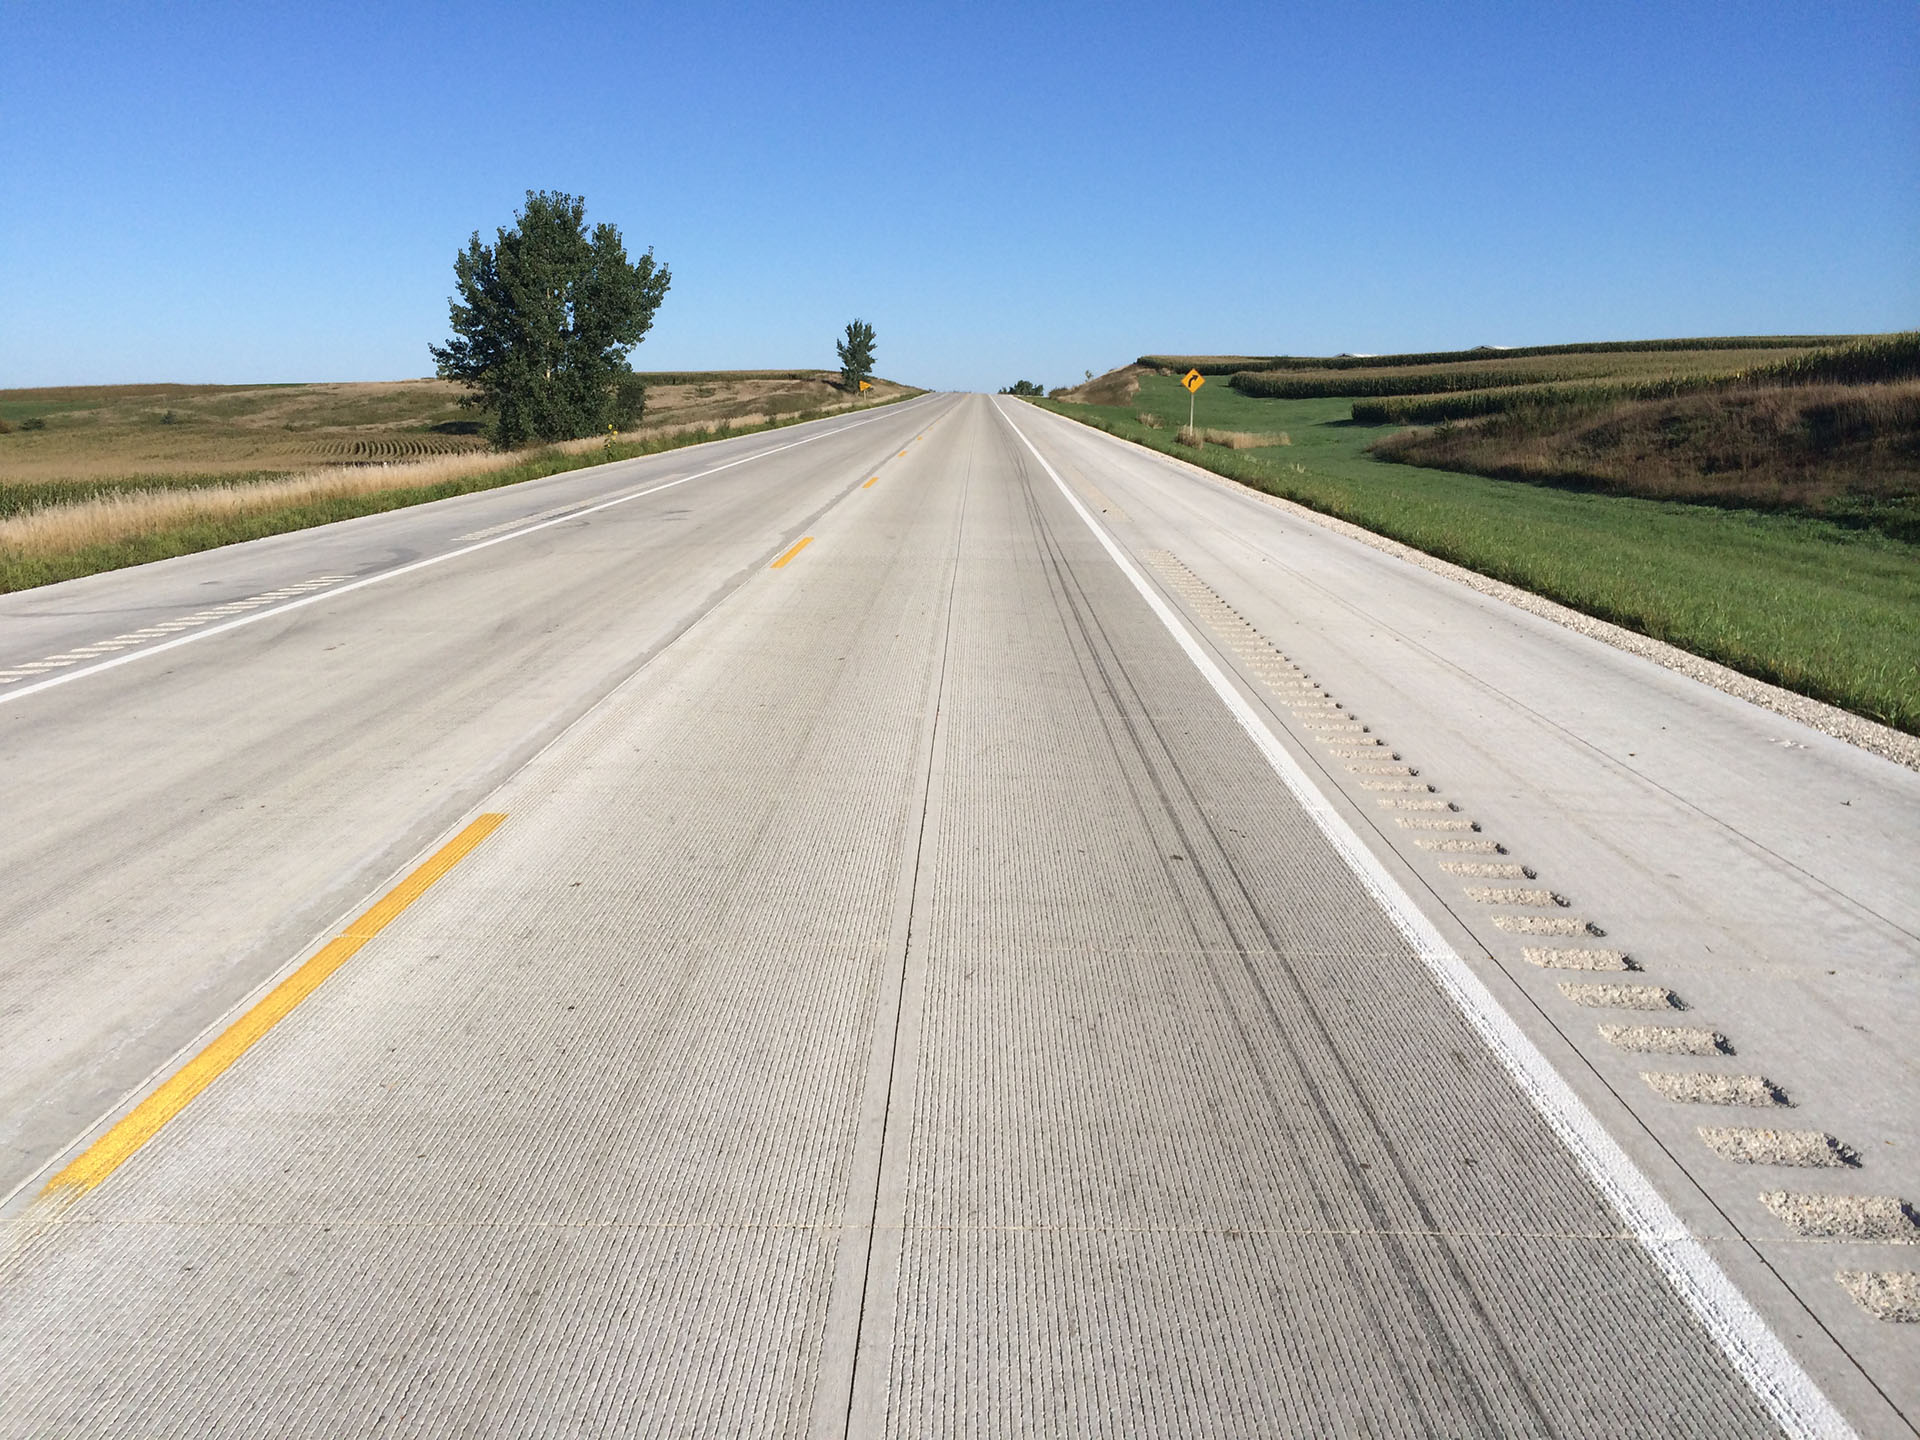 Photo of a two-lane rural concrete highway with no traffic.